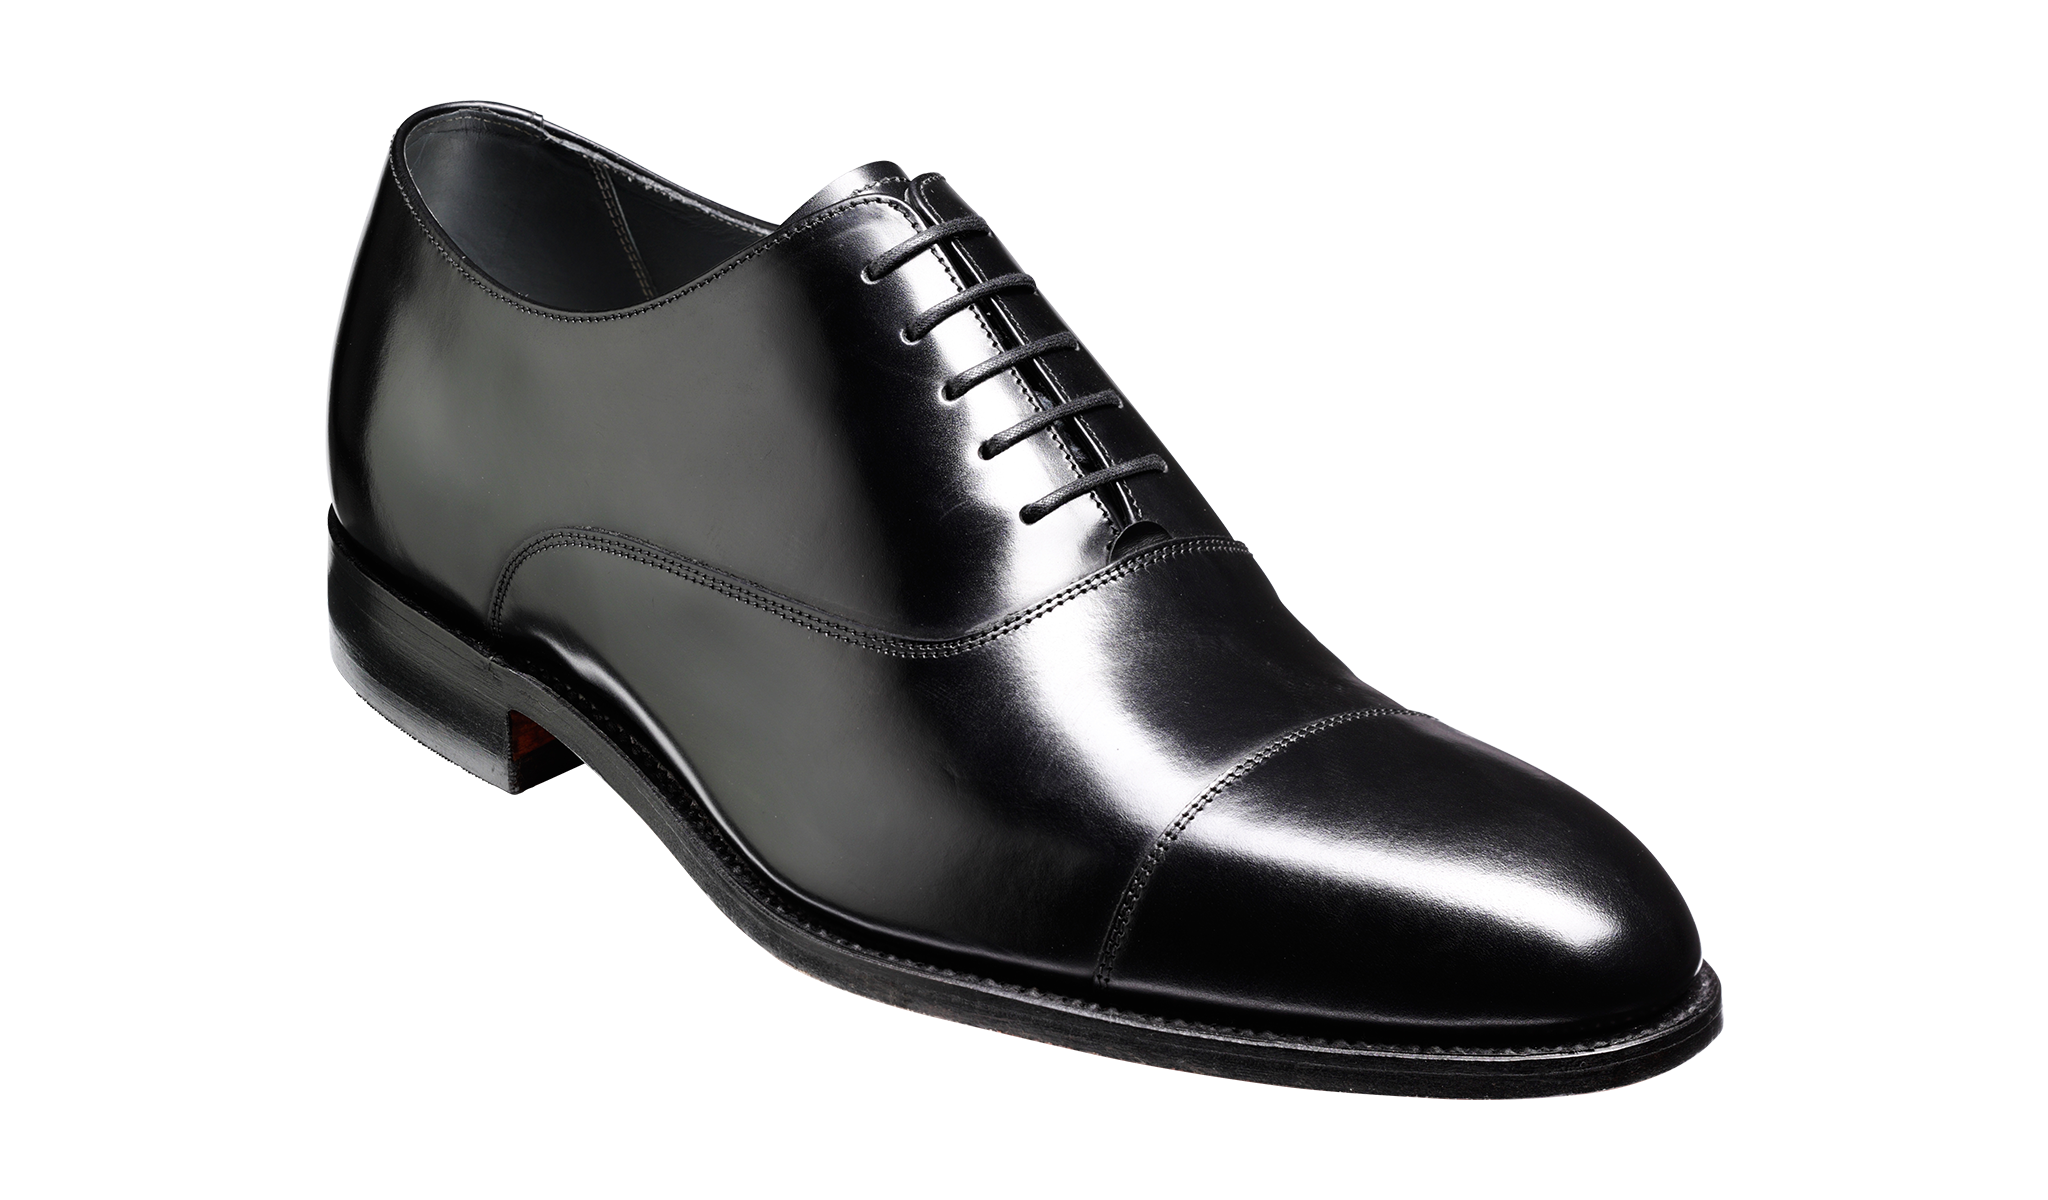 Mens Black Oxford shoes by Barker. 